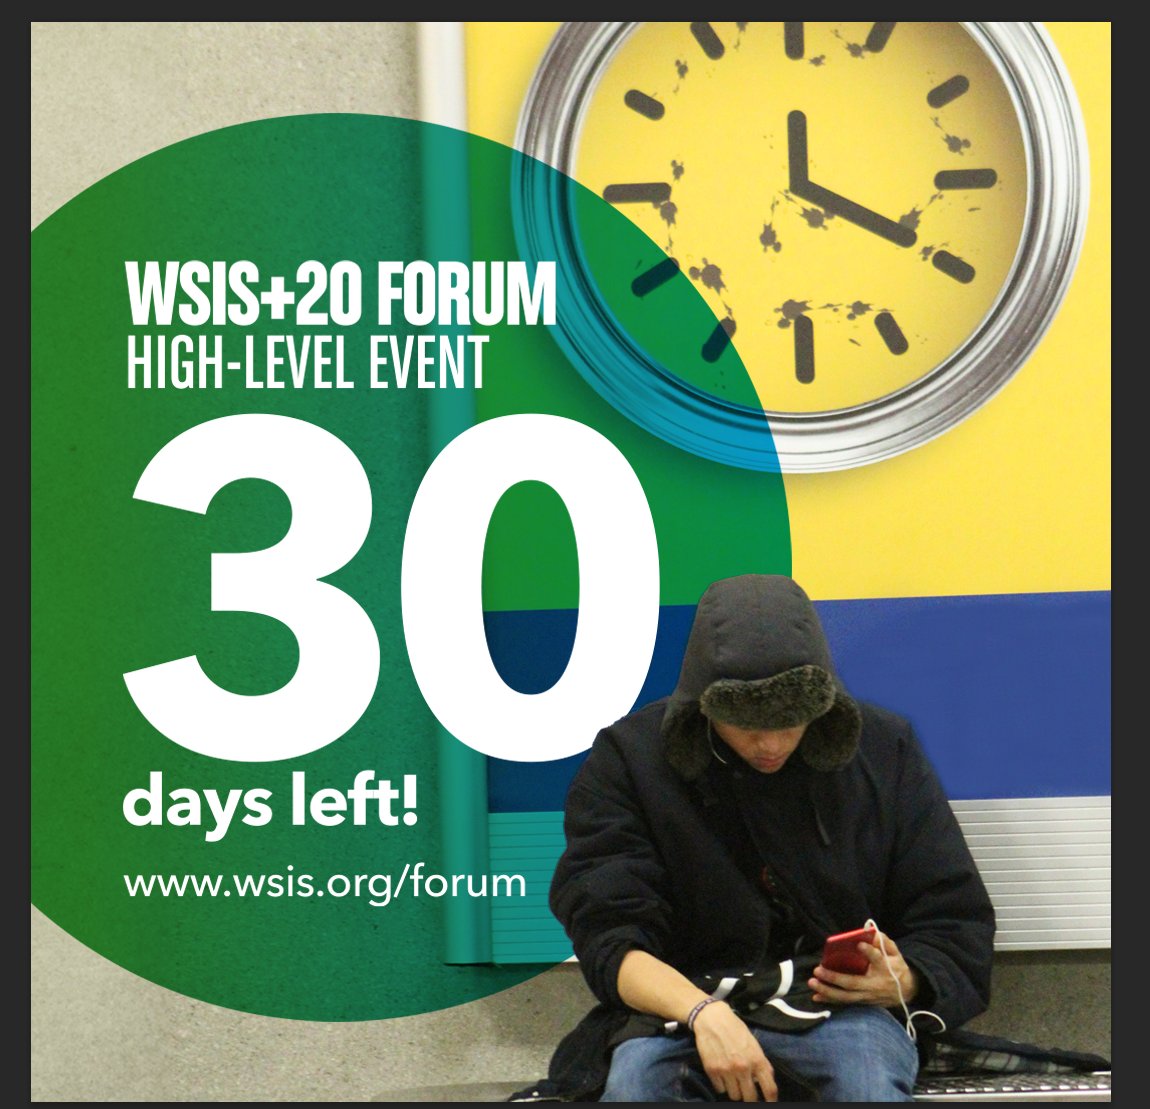 📣 Exciting news! We're just 30 days away from the WSIS+20 High-Level Event! 🎉 Join us as we celebrate two decades of the World Summit on the Information Society. Don't miss out! Register now on our website. ⬇️ wsis.org/forum #WSIS #SDGs